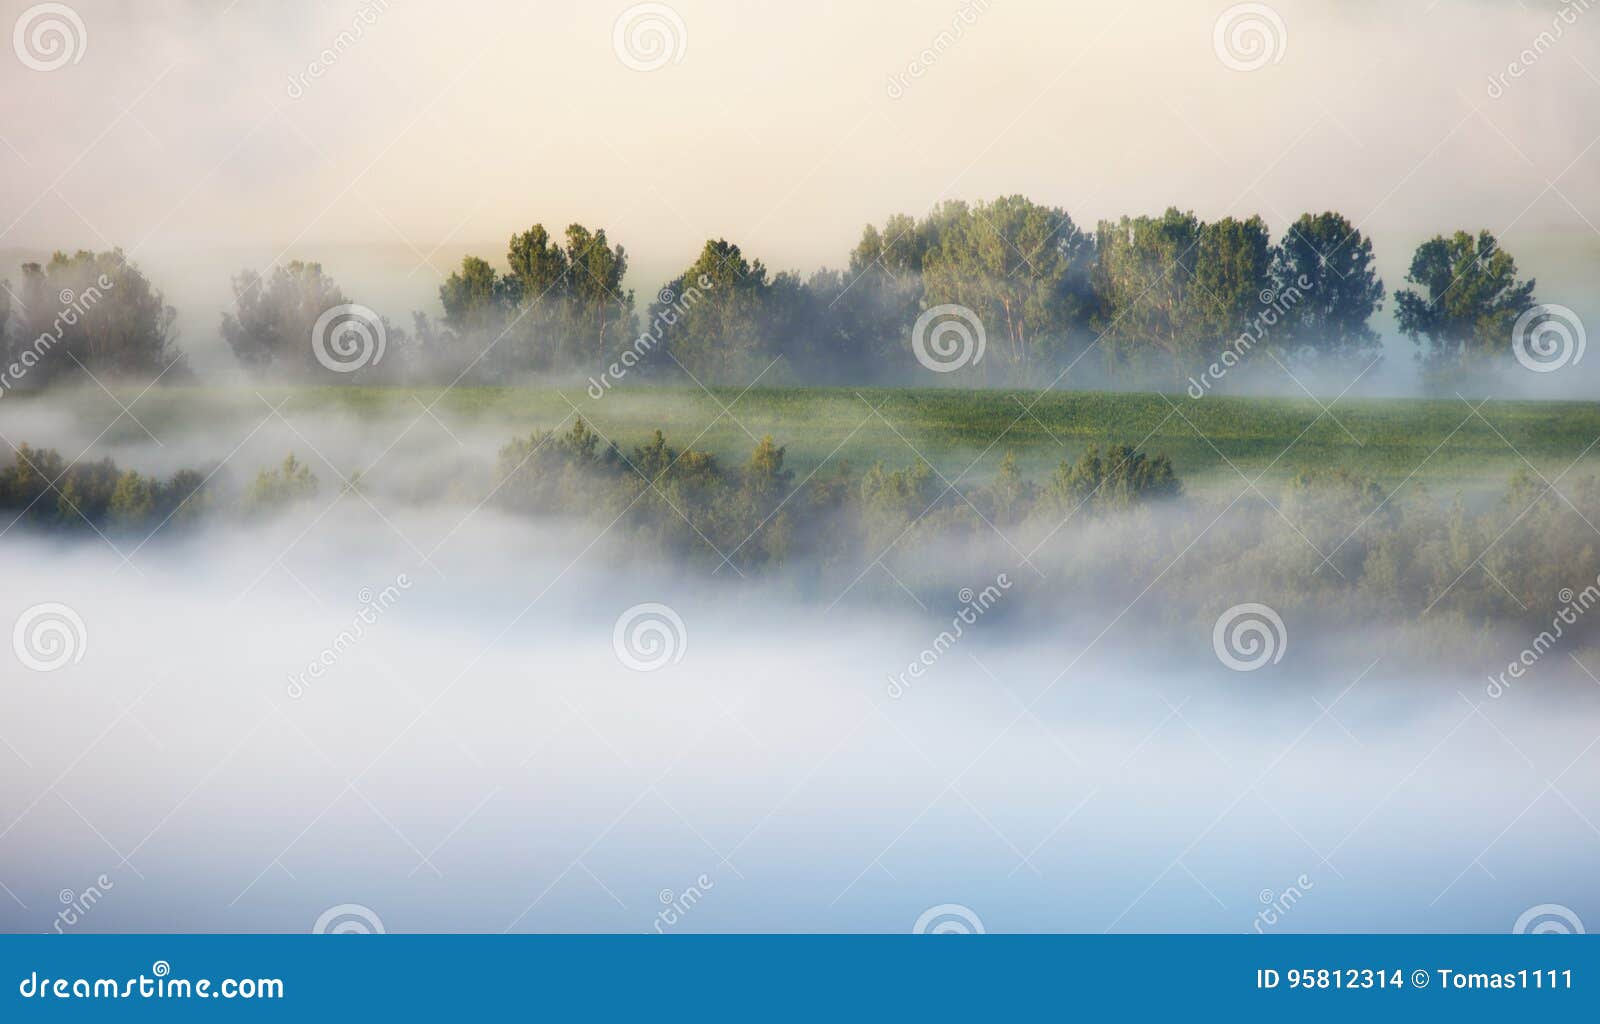 misty morning with tree, landcape